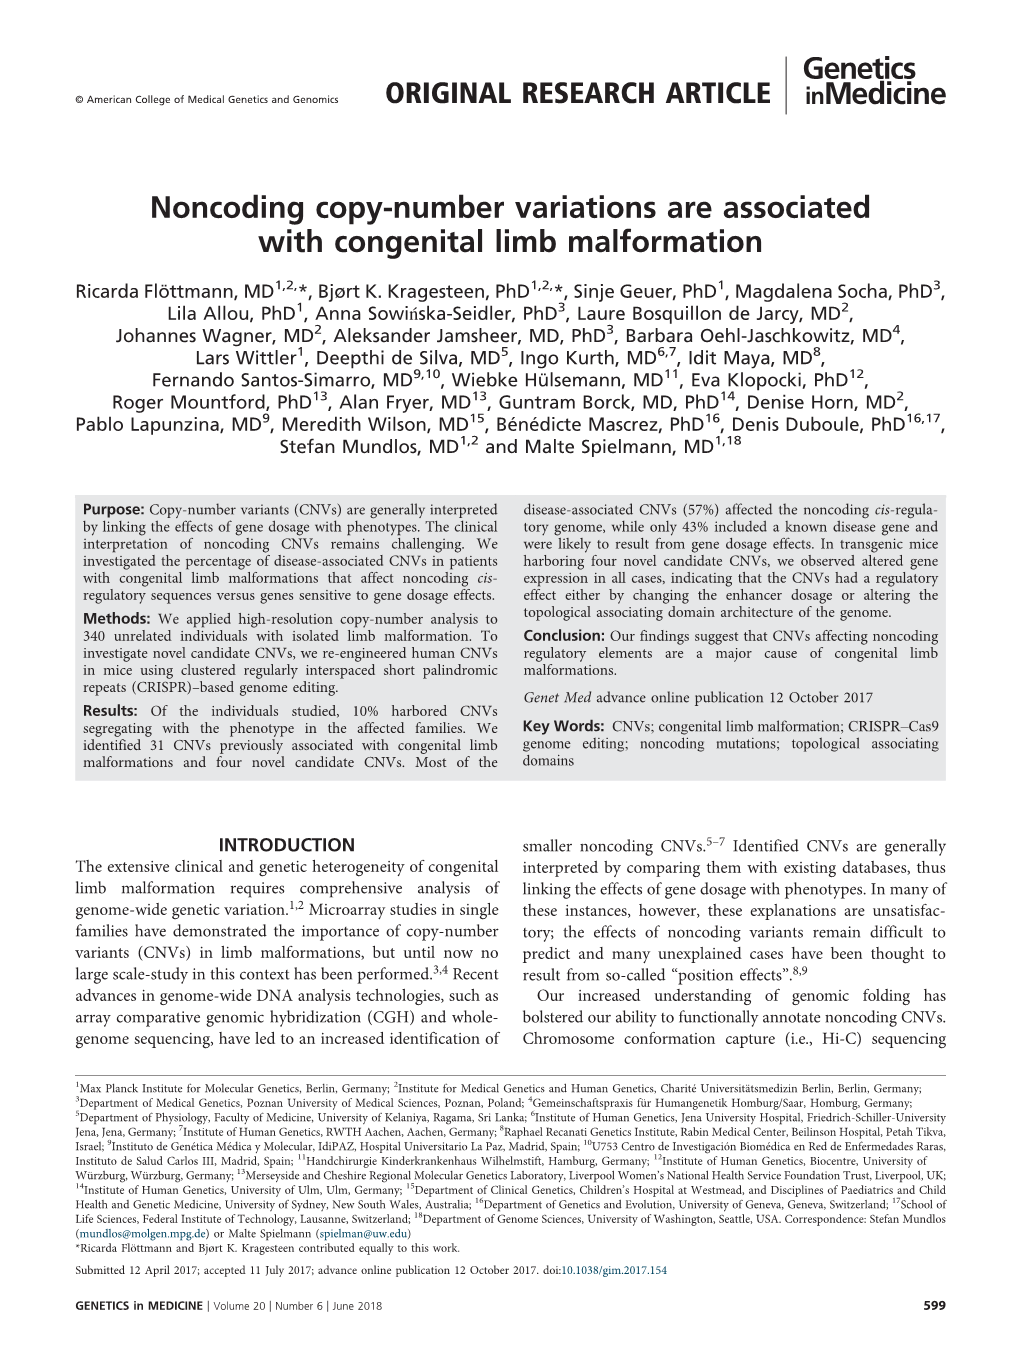 Noncoding Copy-Number Variations Are Associated with Congenital Limb Malformation